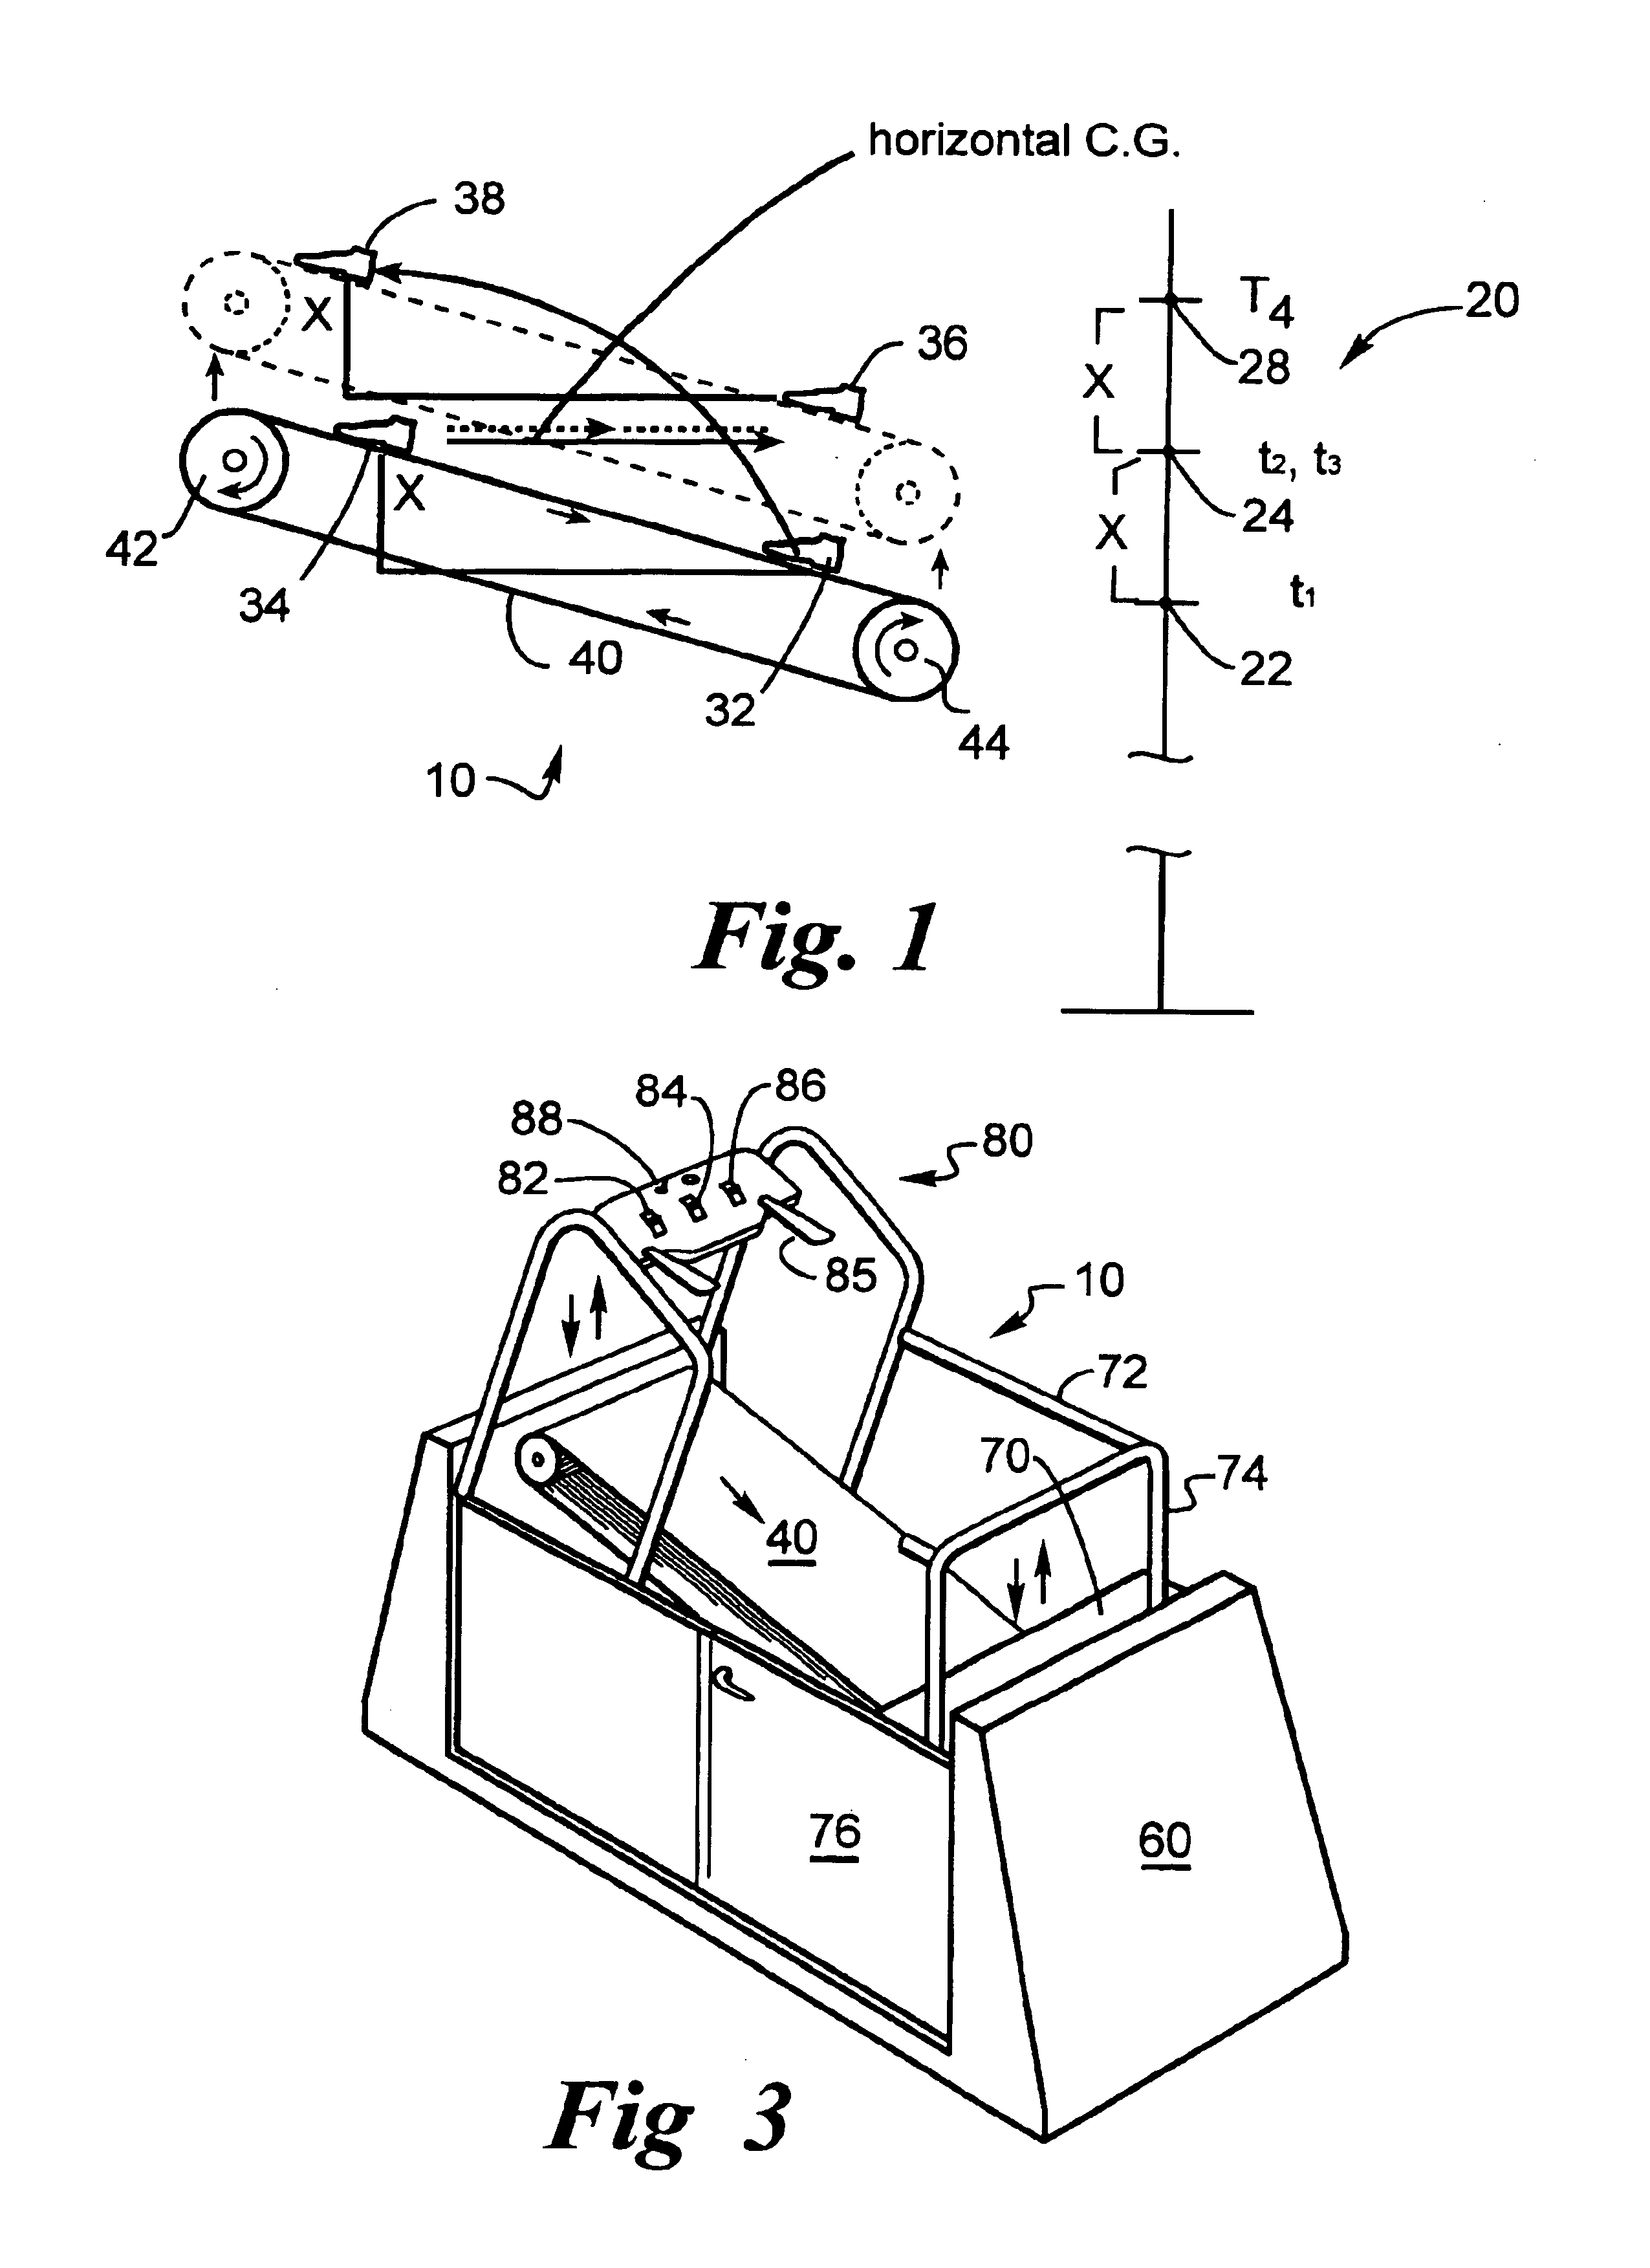 Exercise treadmill with slope adjustment